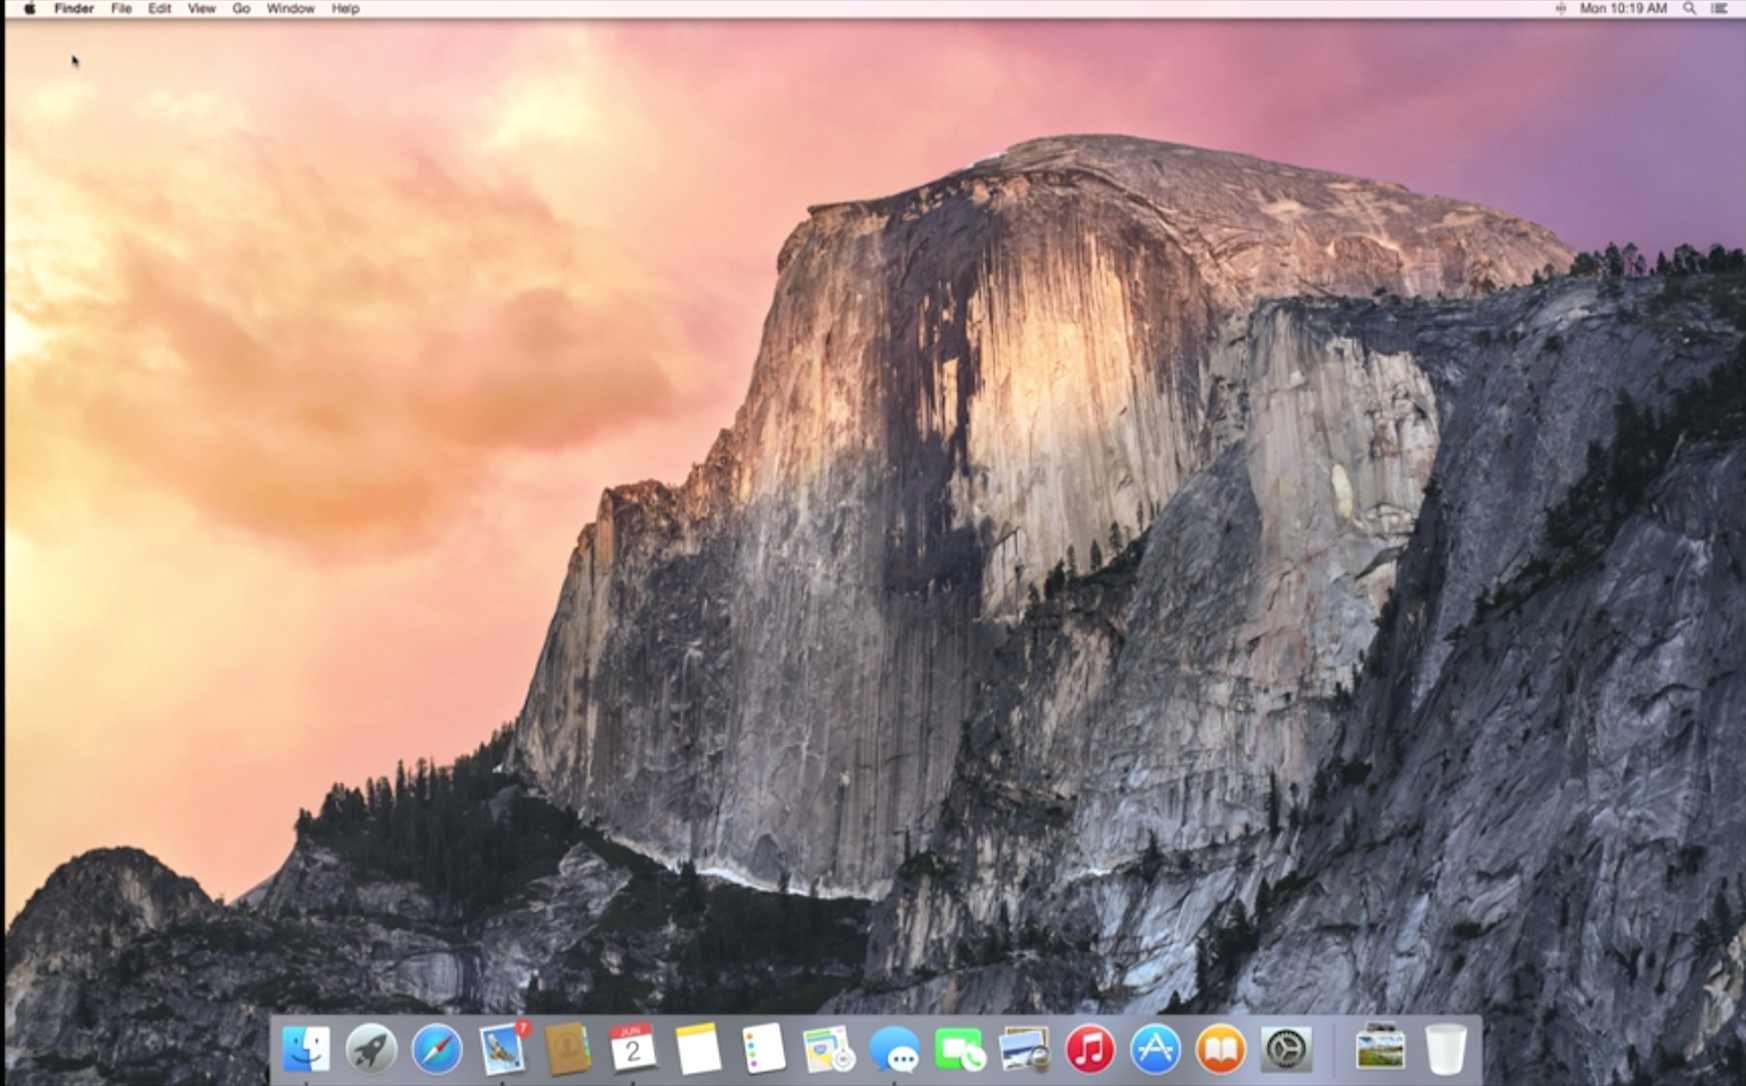 Apple introduces OS X 10.10 Yosemite with new design elements and